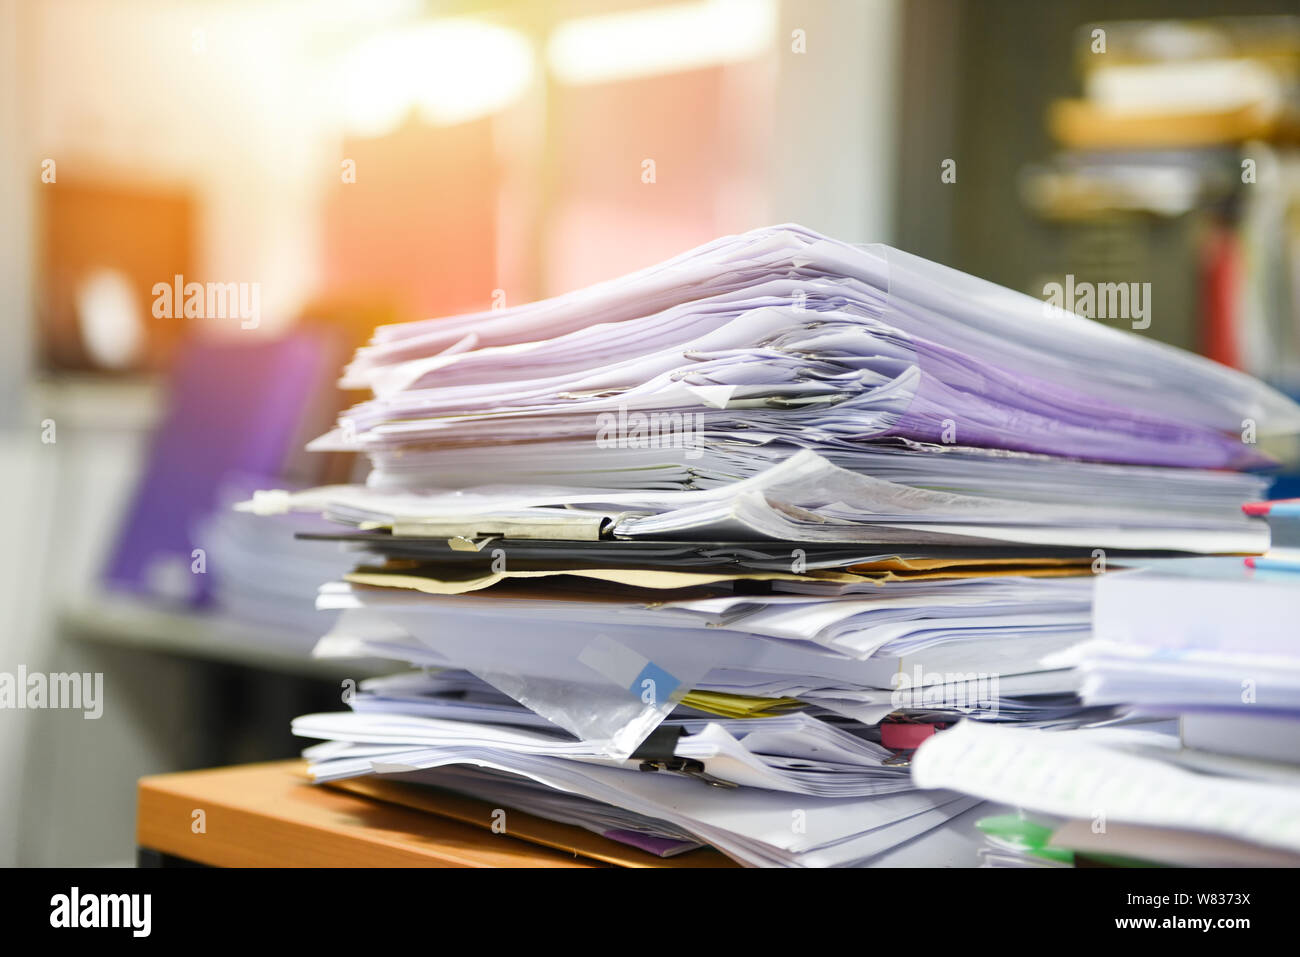 Lot of work document file working stacks of paper files searching information on work desk office / business report papers piles unfinished on the tab Stock Photo